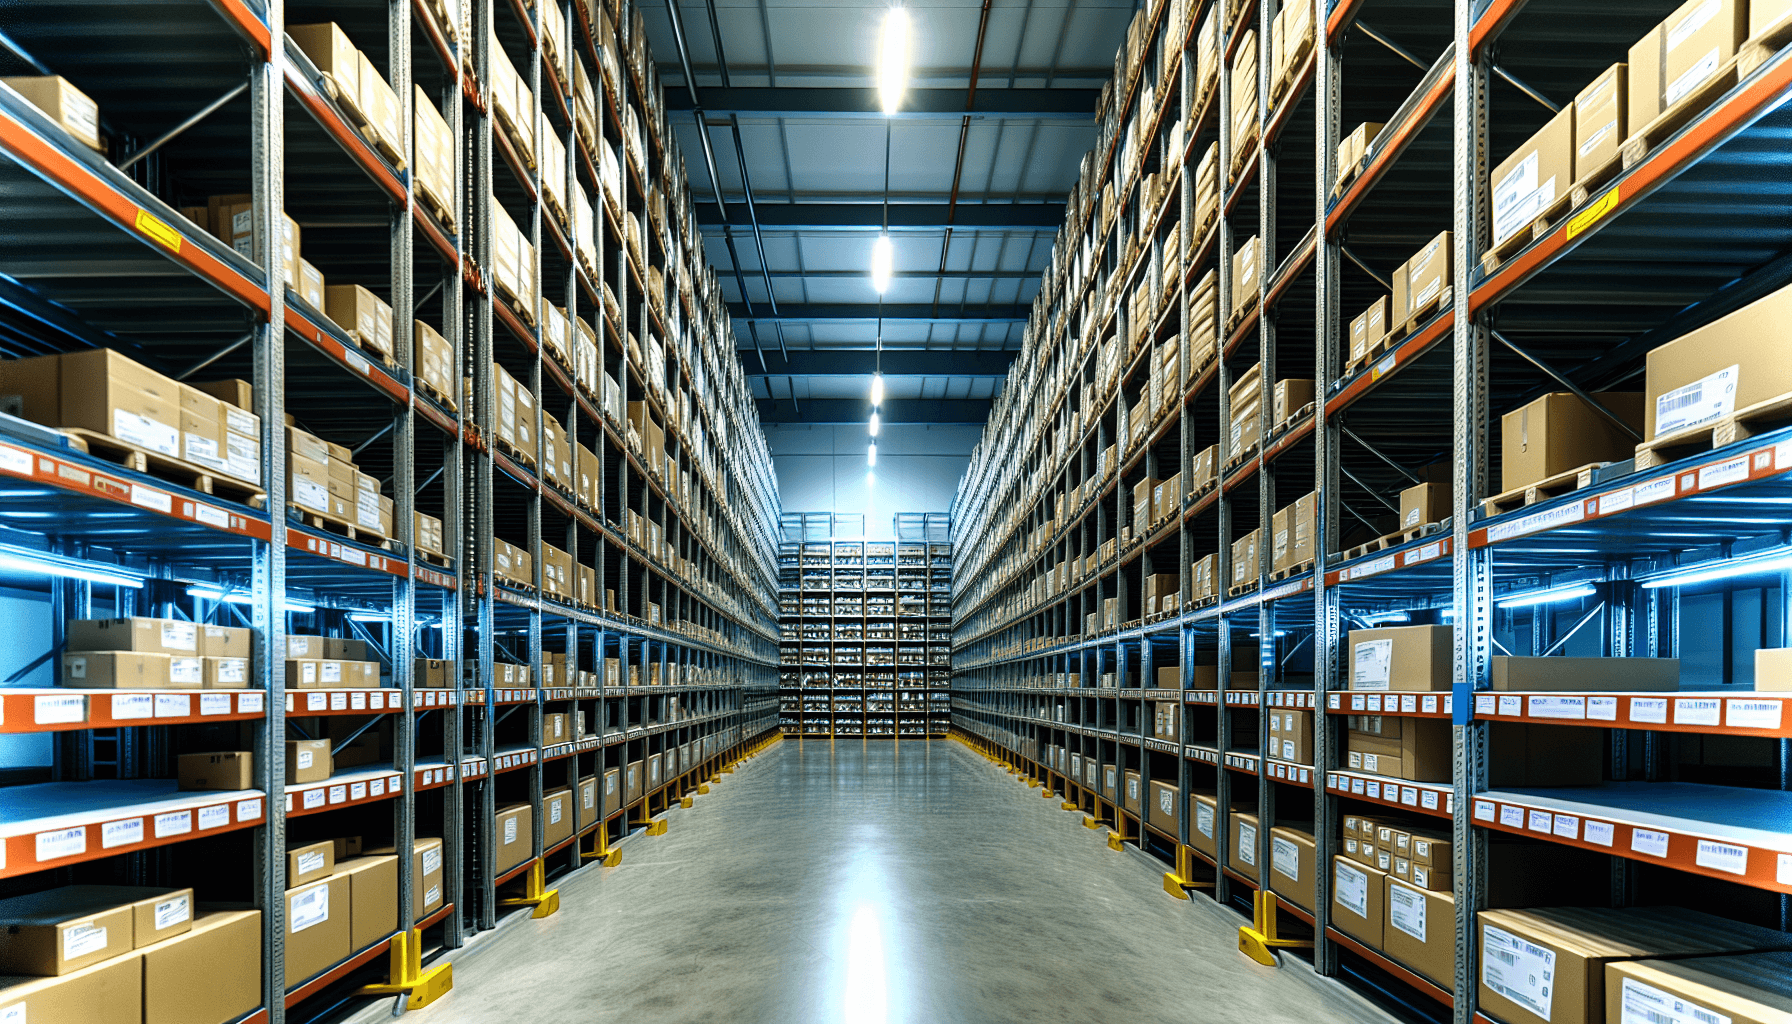 Photo of a well-organized warehouse with labeled shelves